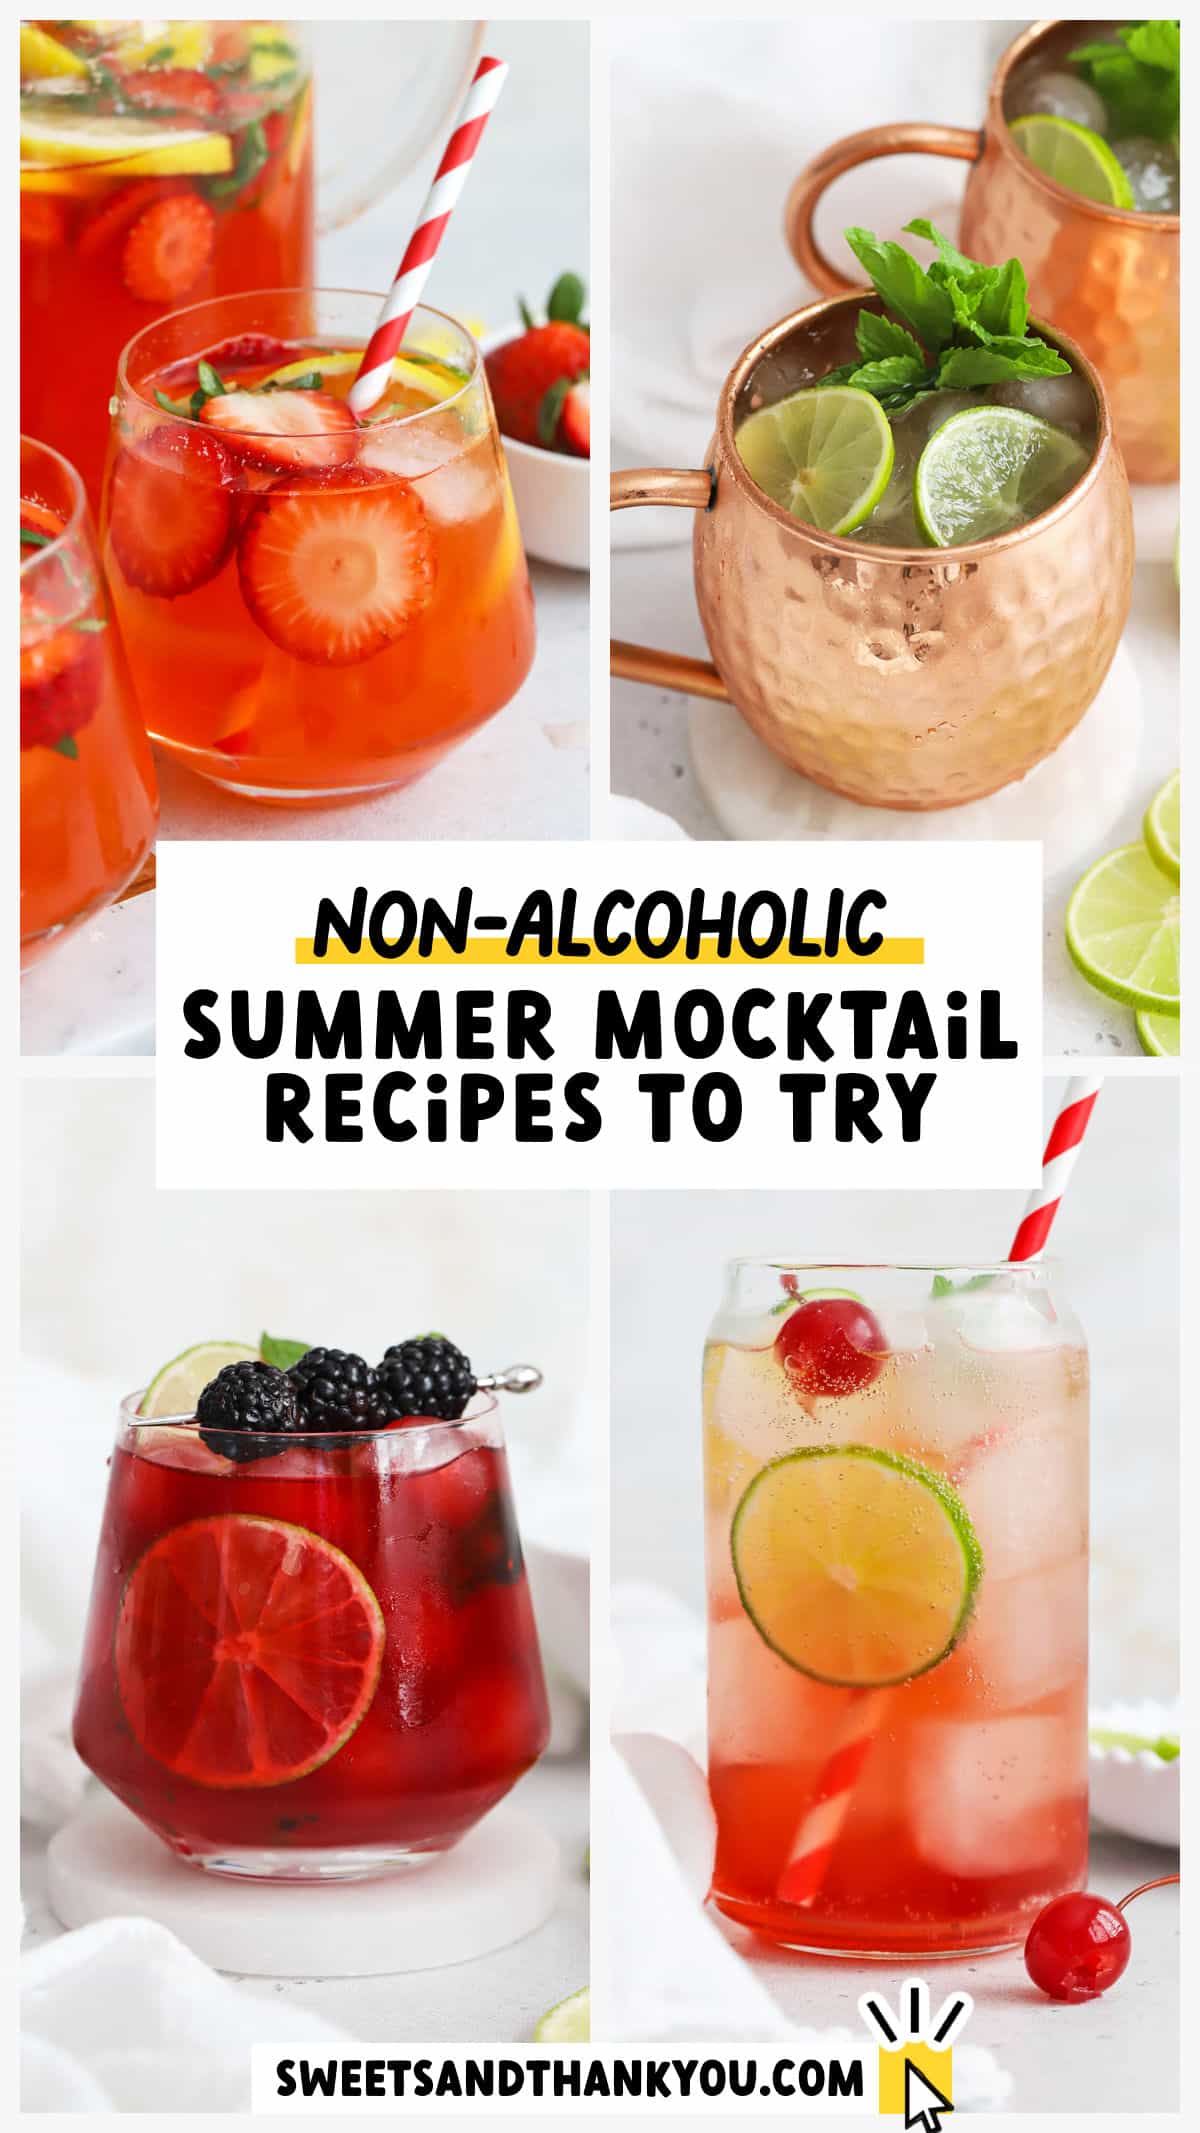 Cool off with these 13+ summer mocktail recipes! These delicious non-alcoholic summer drinks will help you beat the heat in style. From fruity mocktails to fun flavors of lemonade to classic virign drinks like virgin palomas and mojitos, there's a summer mocktail recipe for every occasion. 